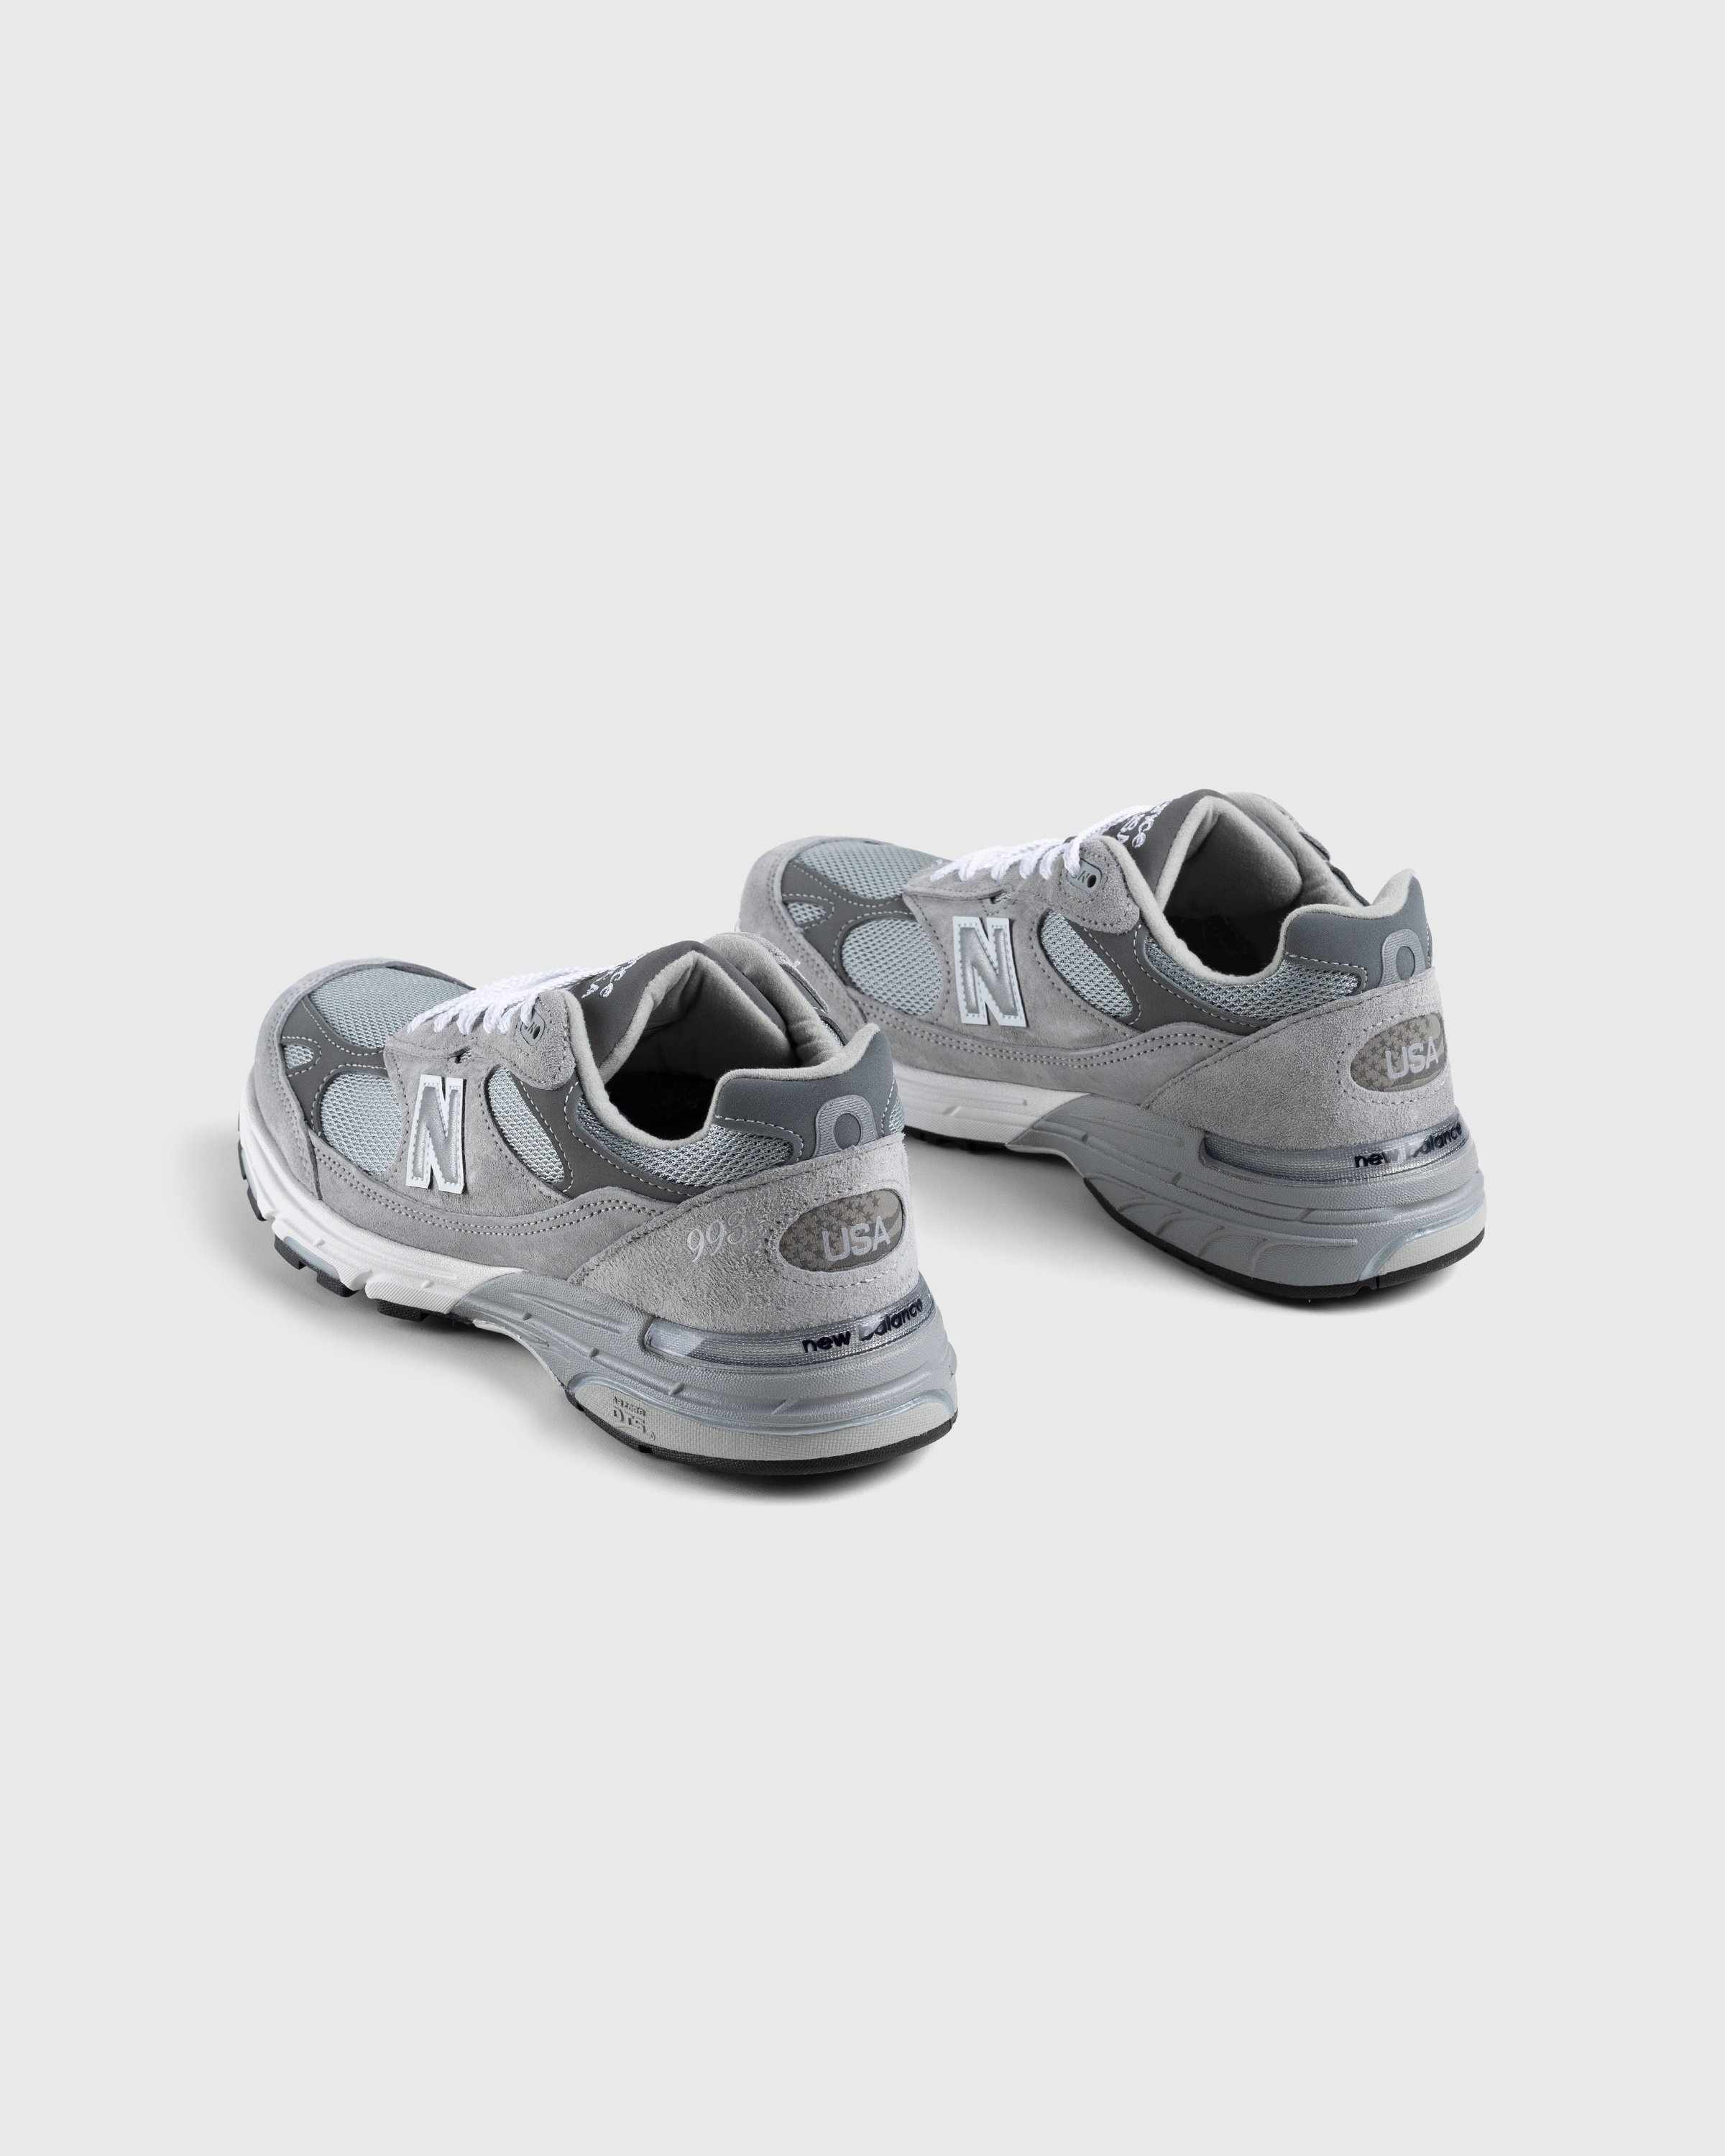 New Balance – MR993GL Grey - Low Top Sneakers - Grey - Image 4